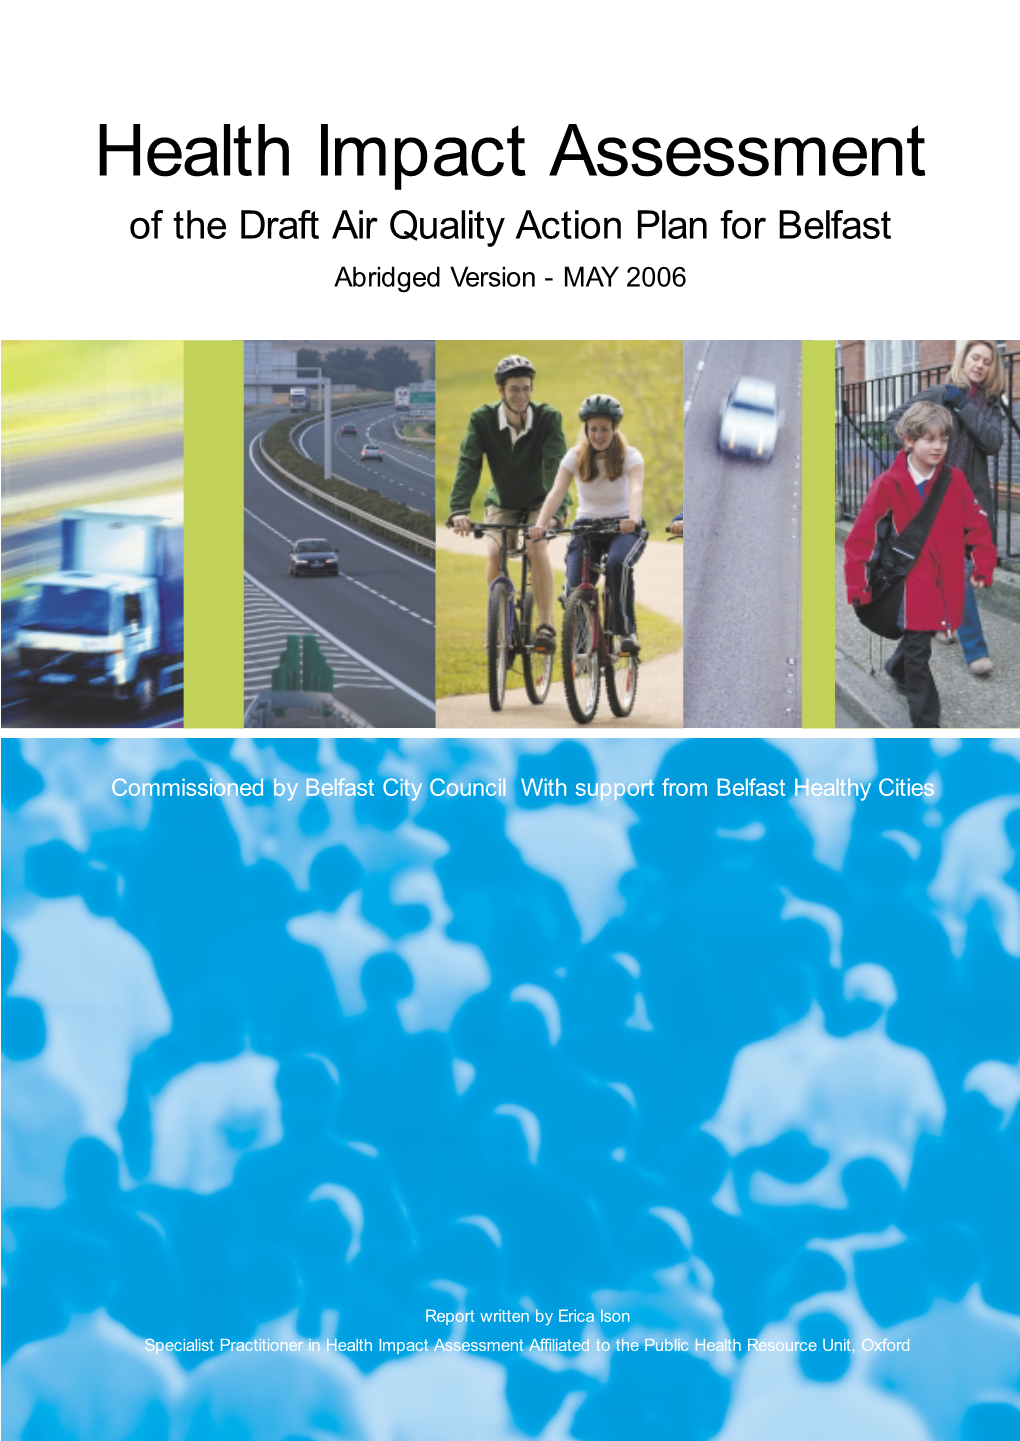 Health Impact Assessment of the Draft Air Quality Action Plan for Belfast Abridged Version - MAY 2006